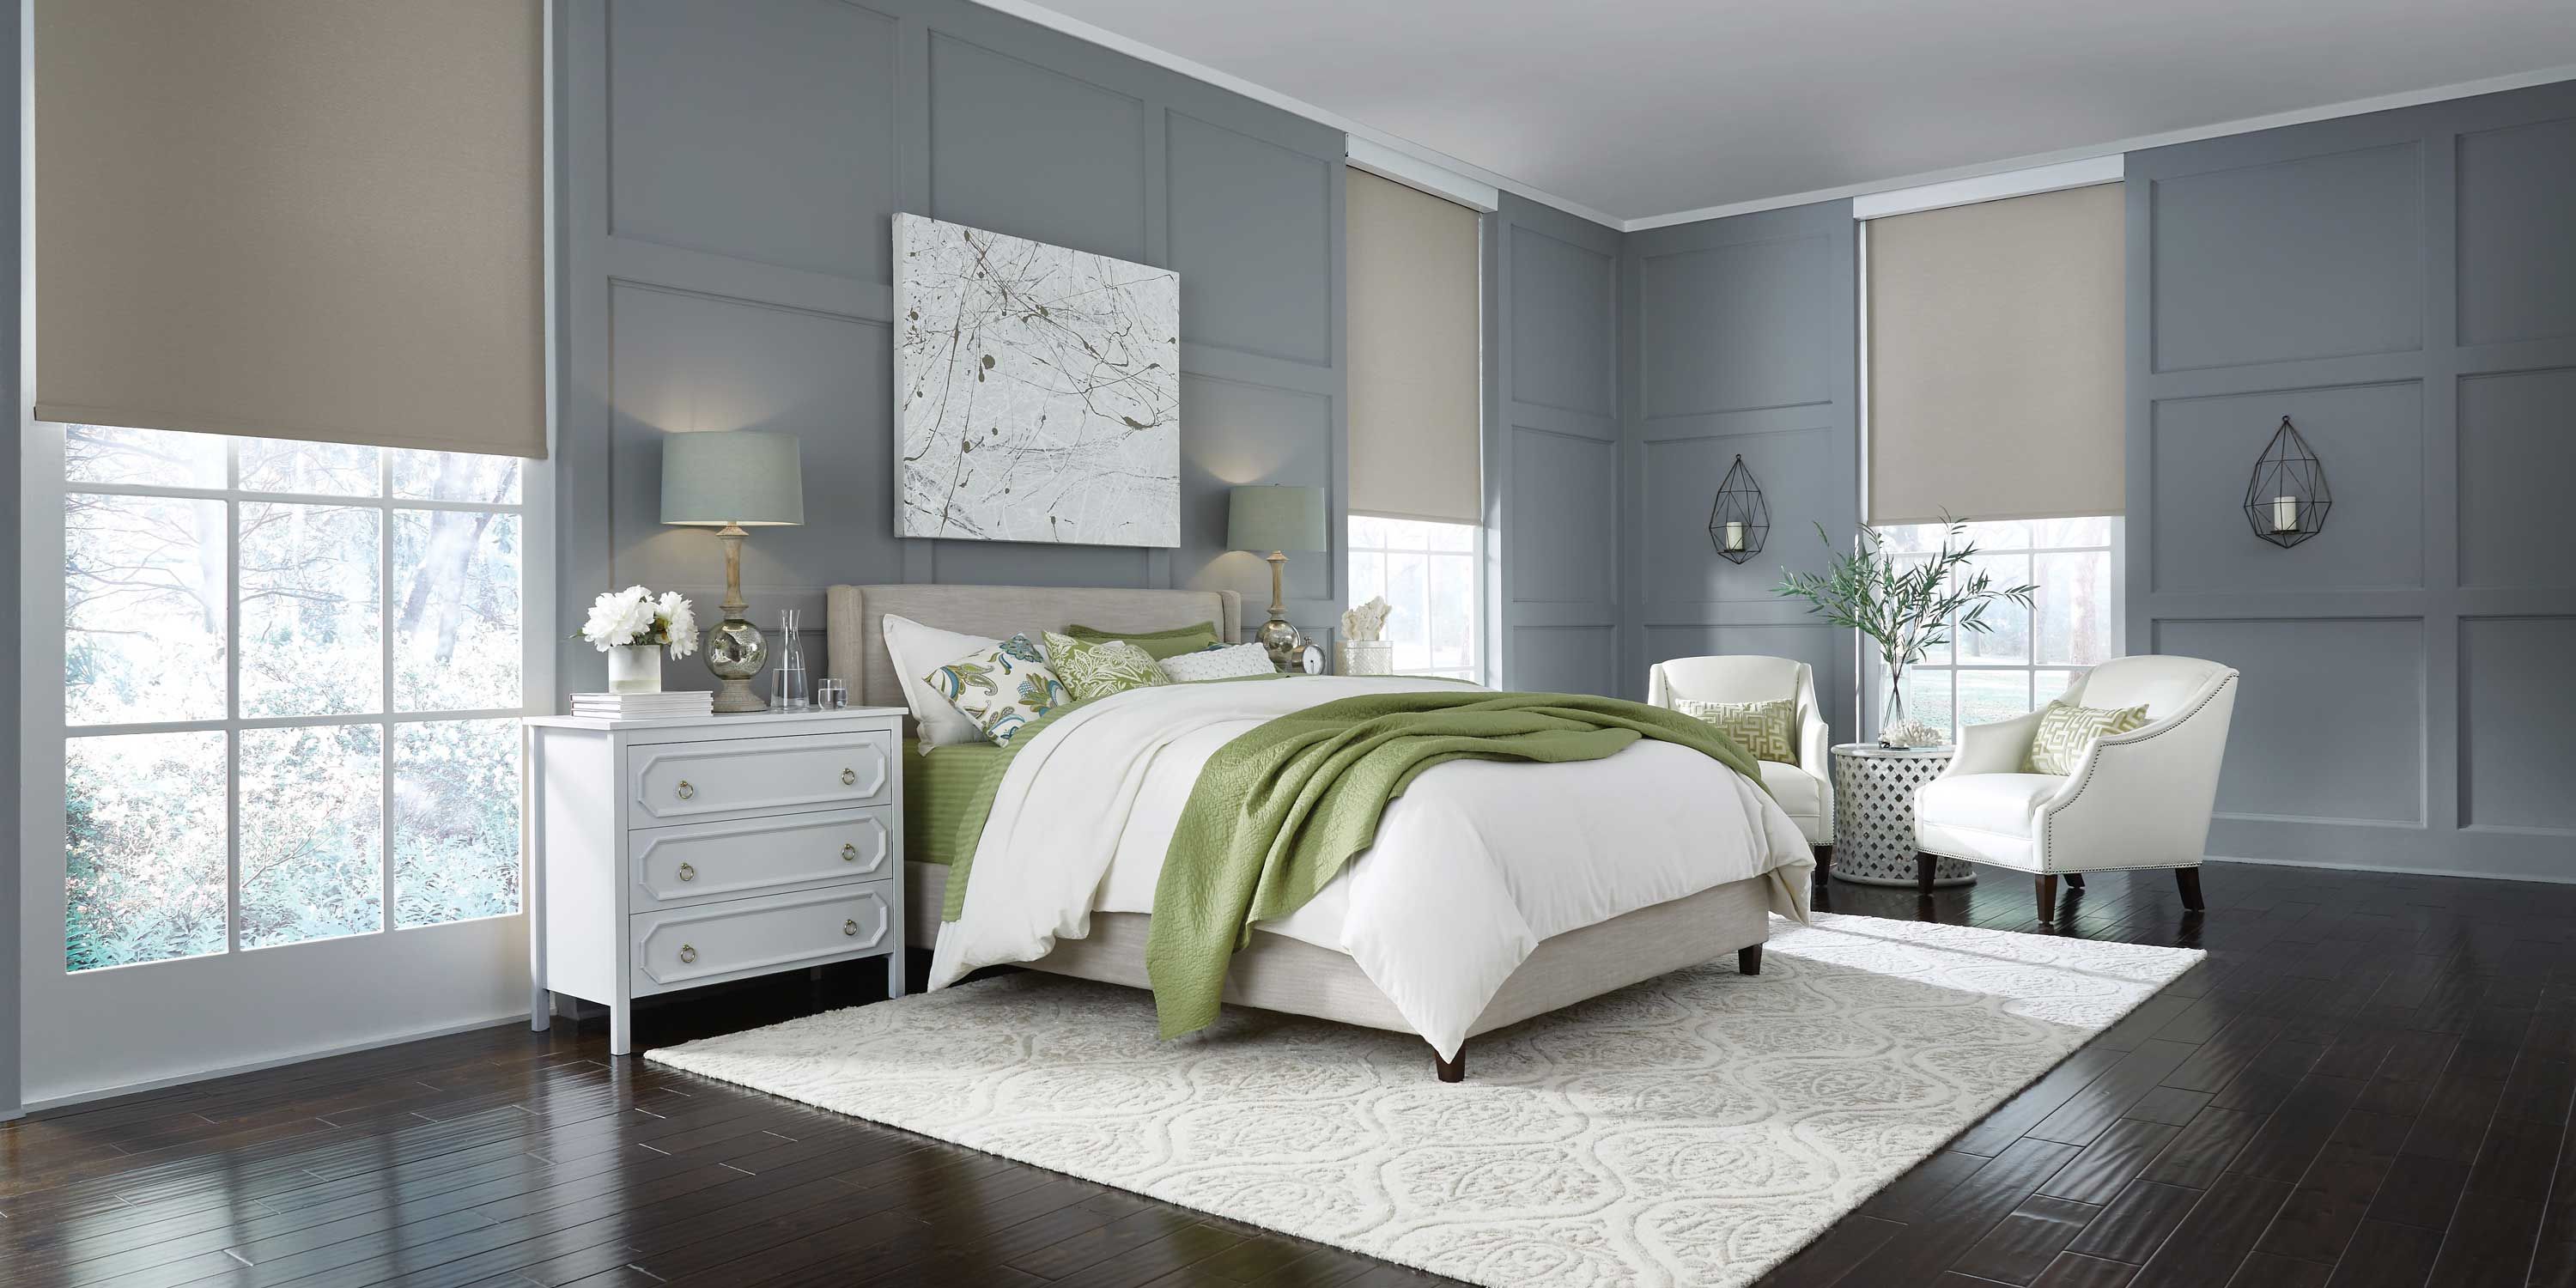 cool toned bedroom with lutron lighting and shades, white and green accents